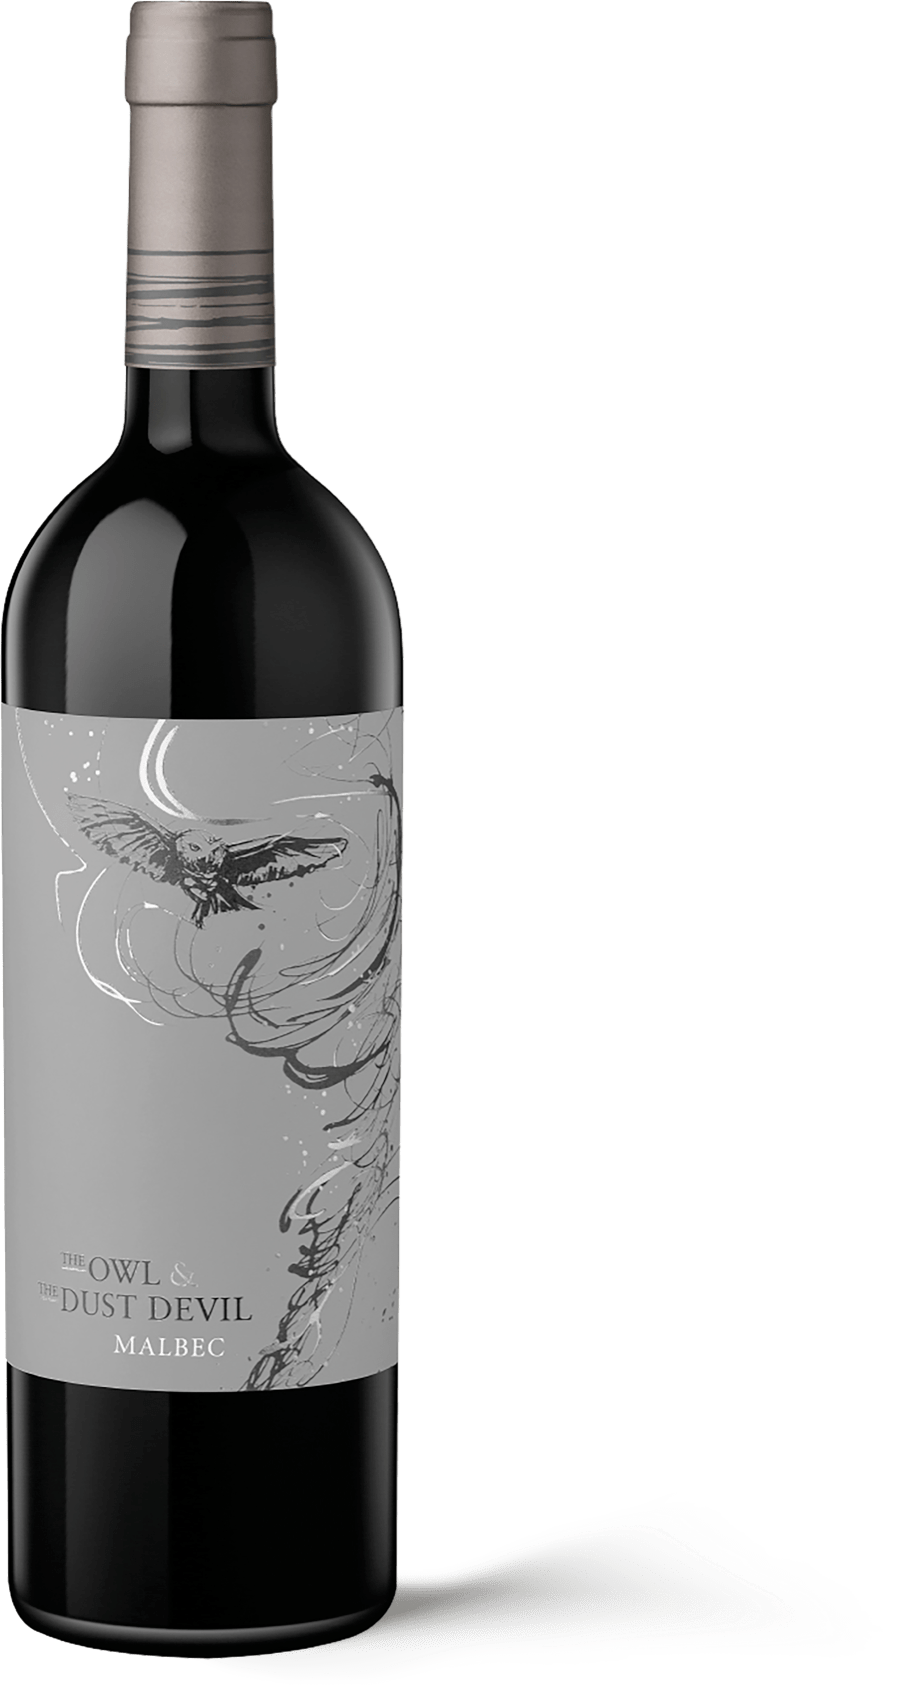 The Owl & The Dust Devil Malbec